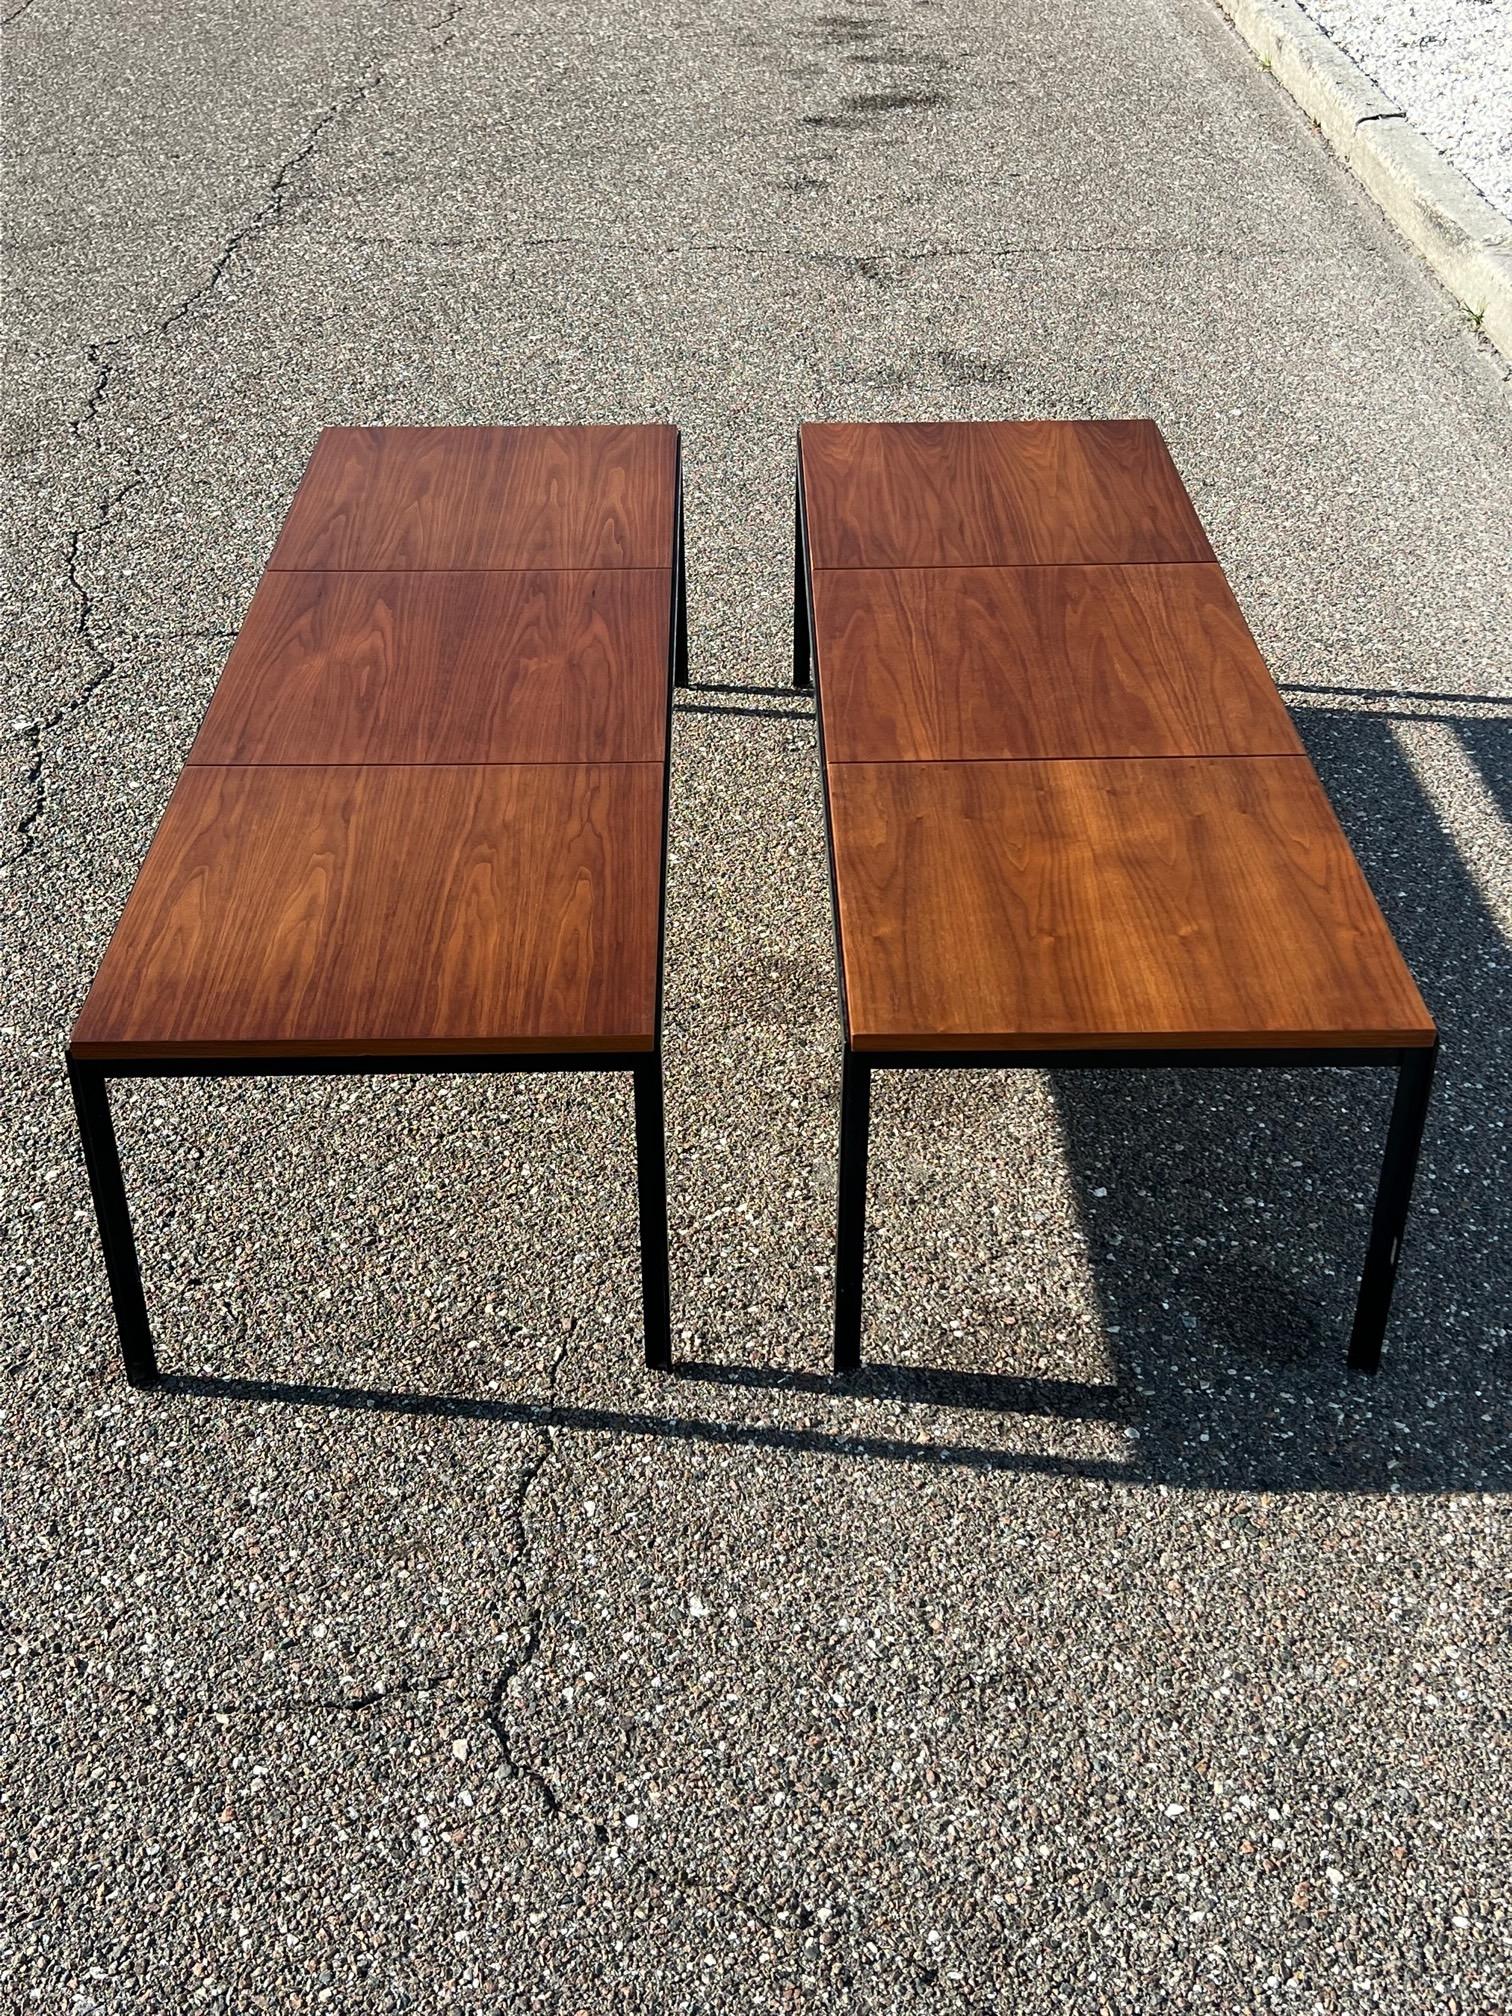 Mid-20th Century A Pair Of Florence Knoll Angle Iron Tables Or Benches In Walnut For Sale